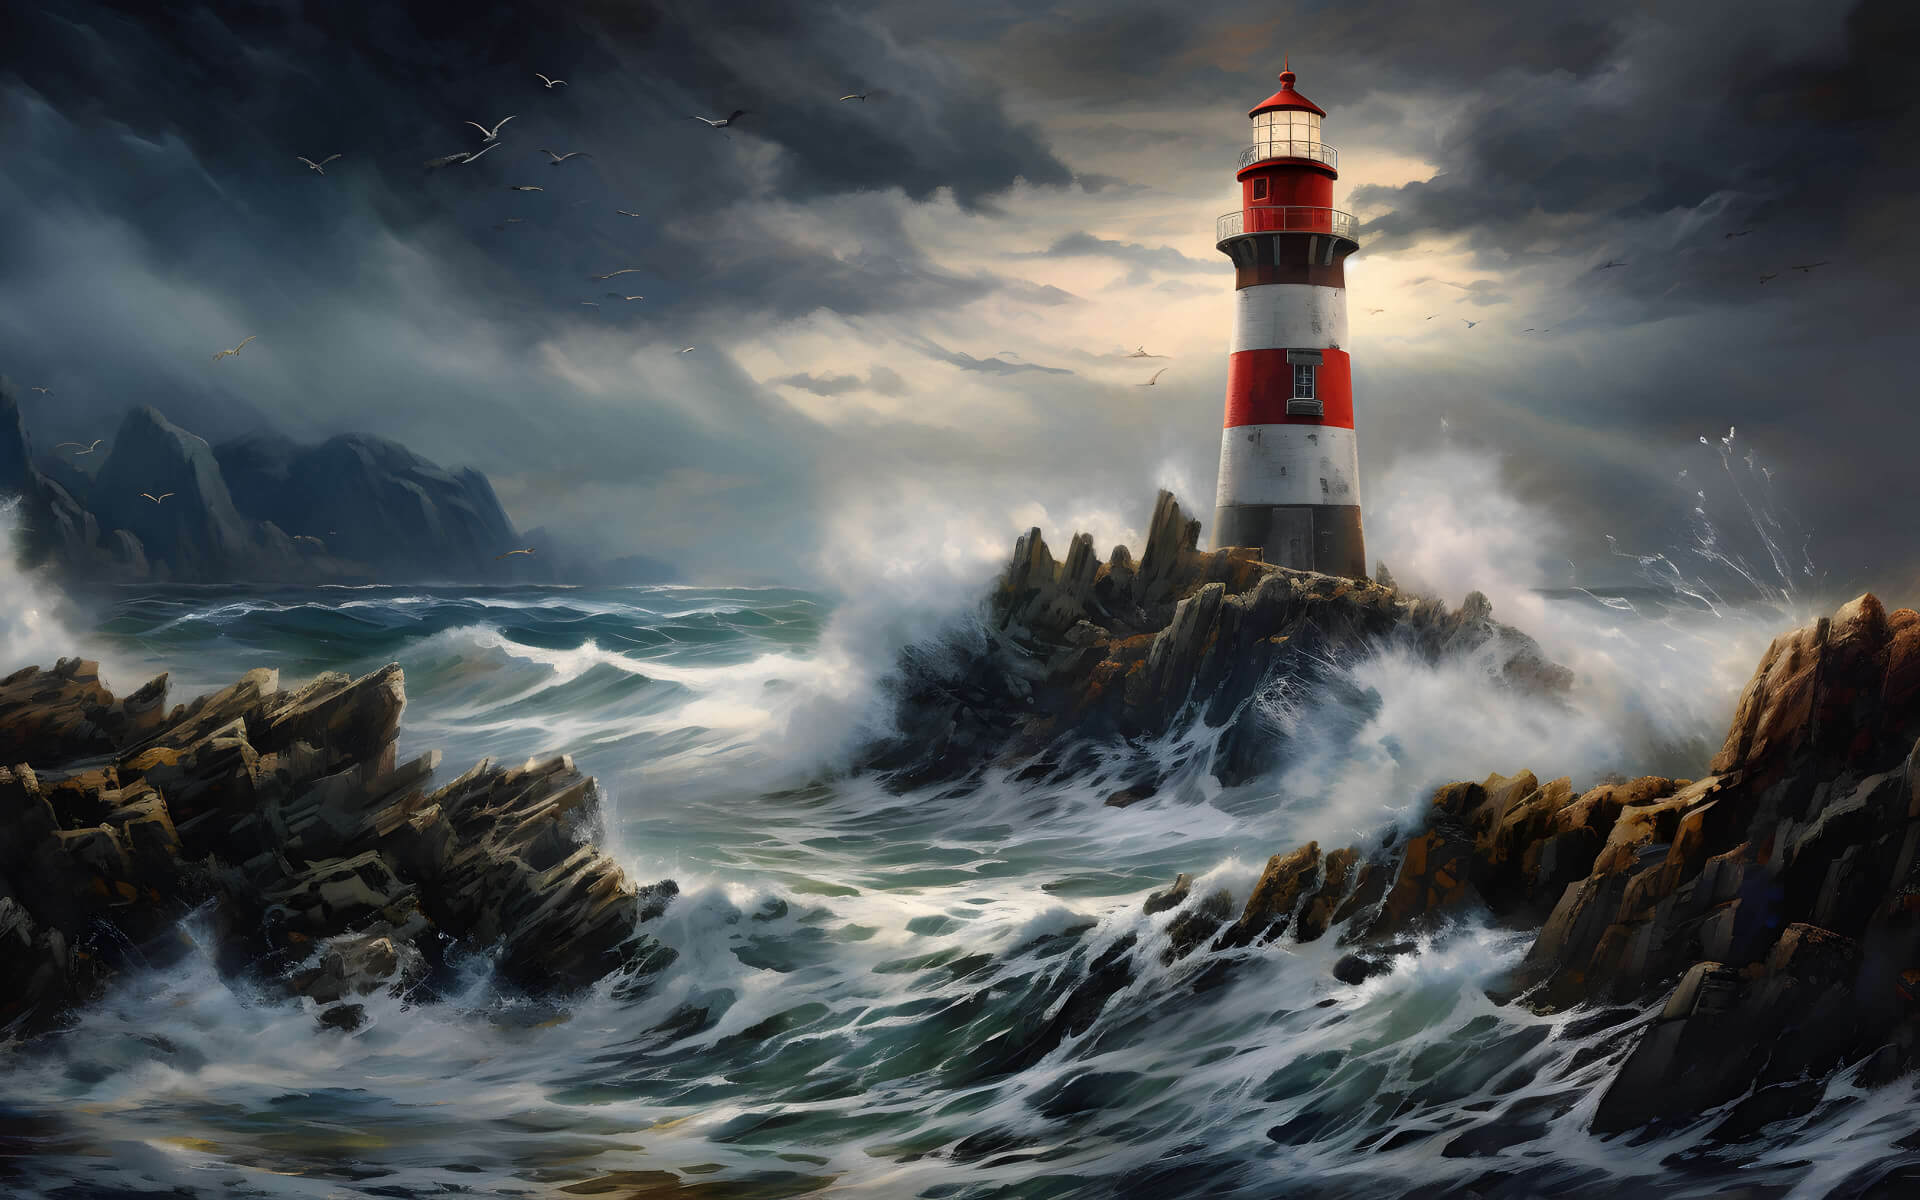 Lighthouse in the ocean waves wallpaper 1920x1200